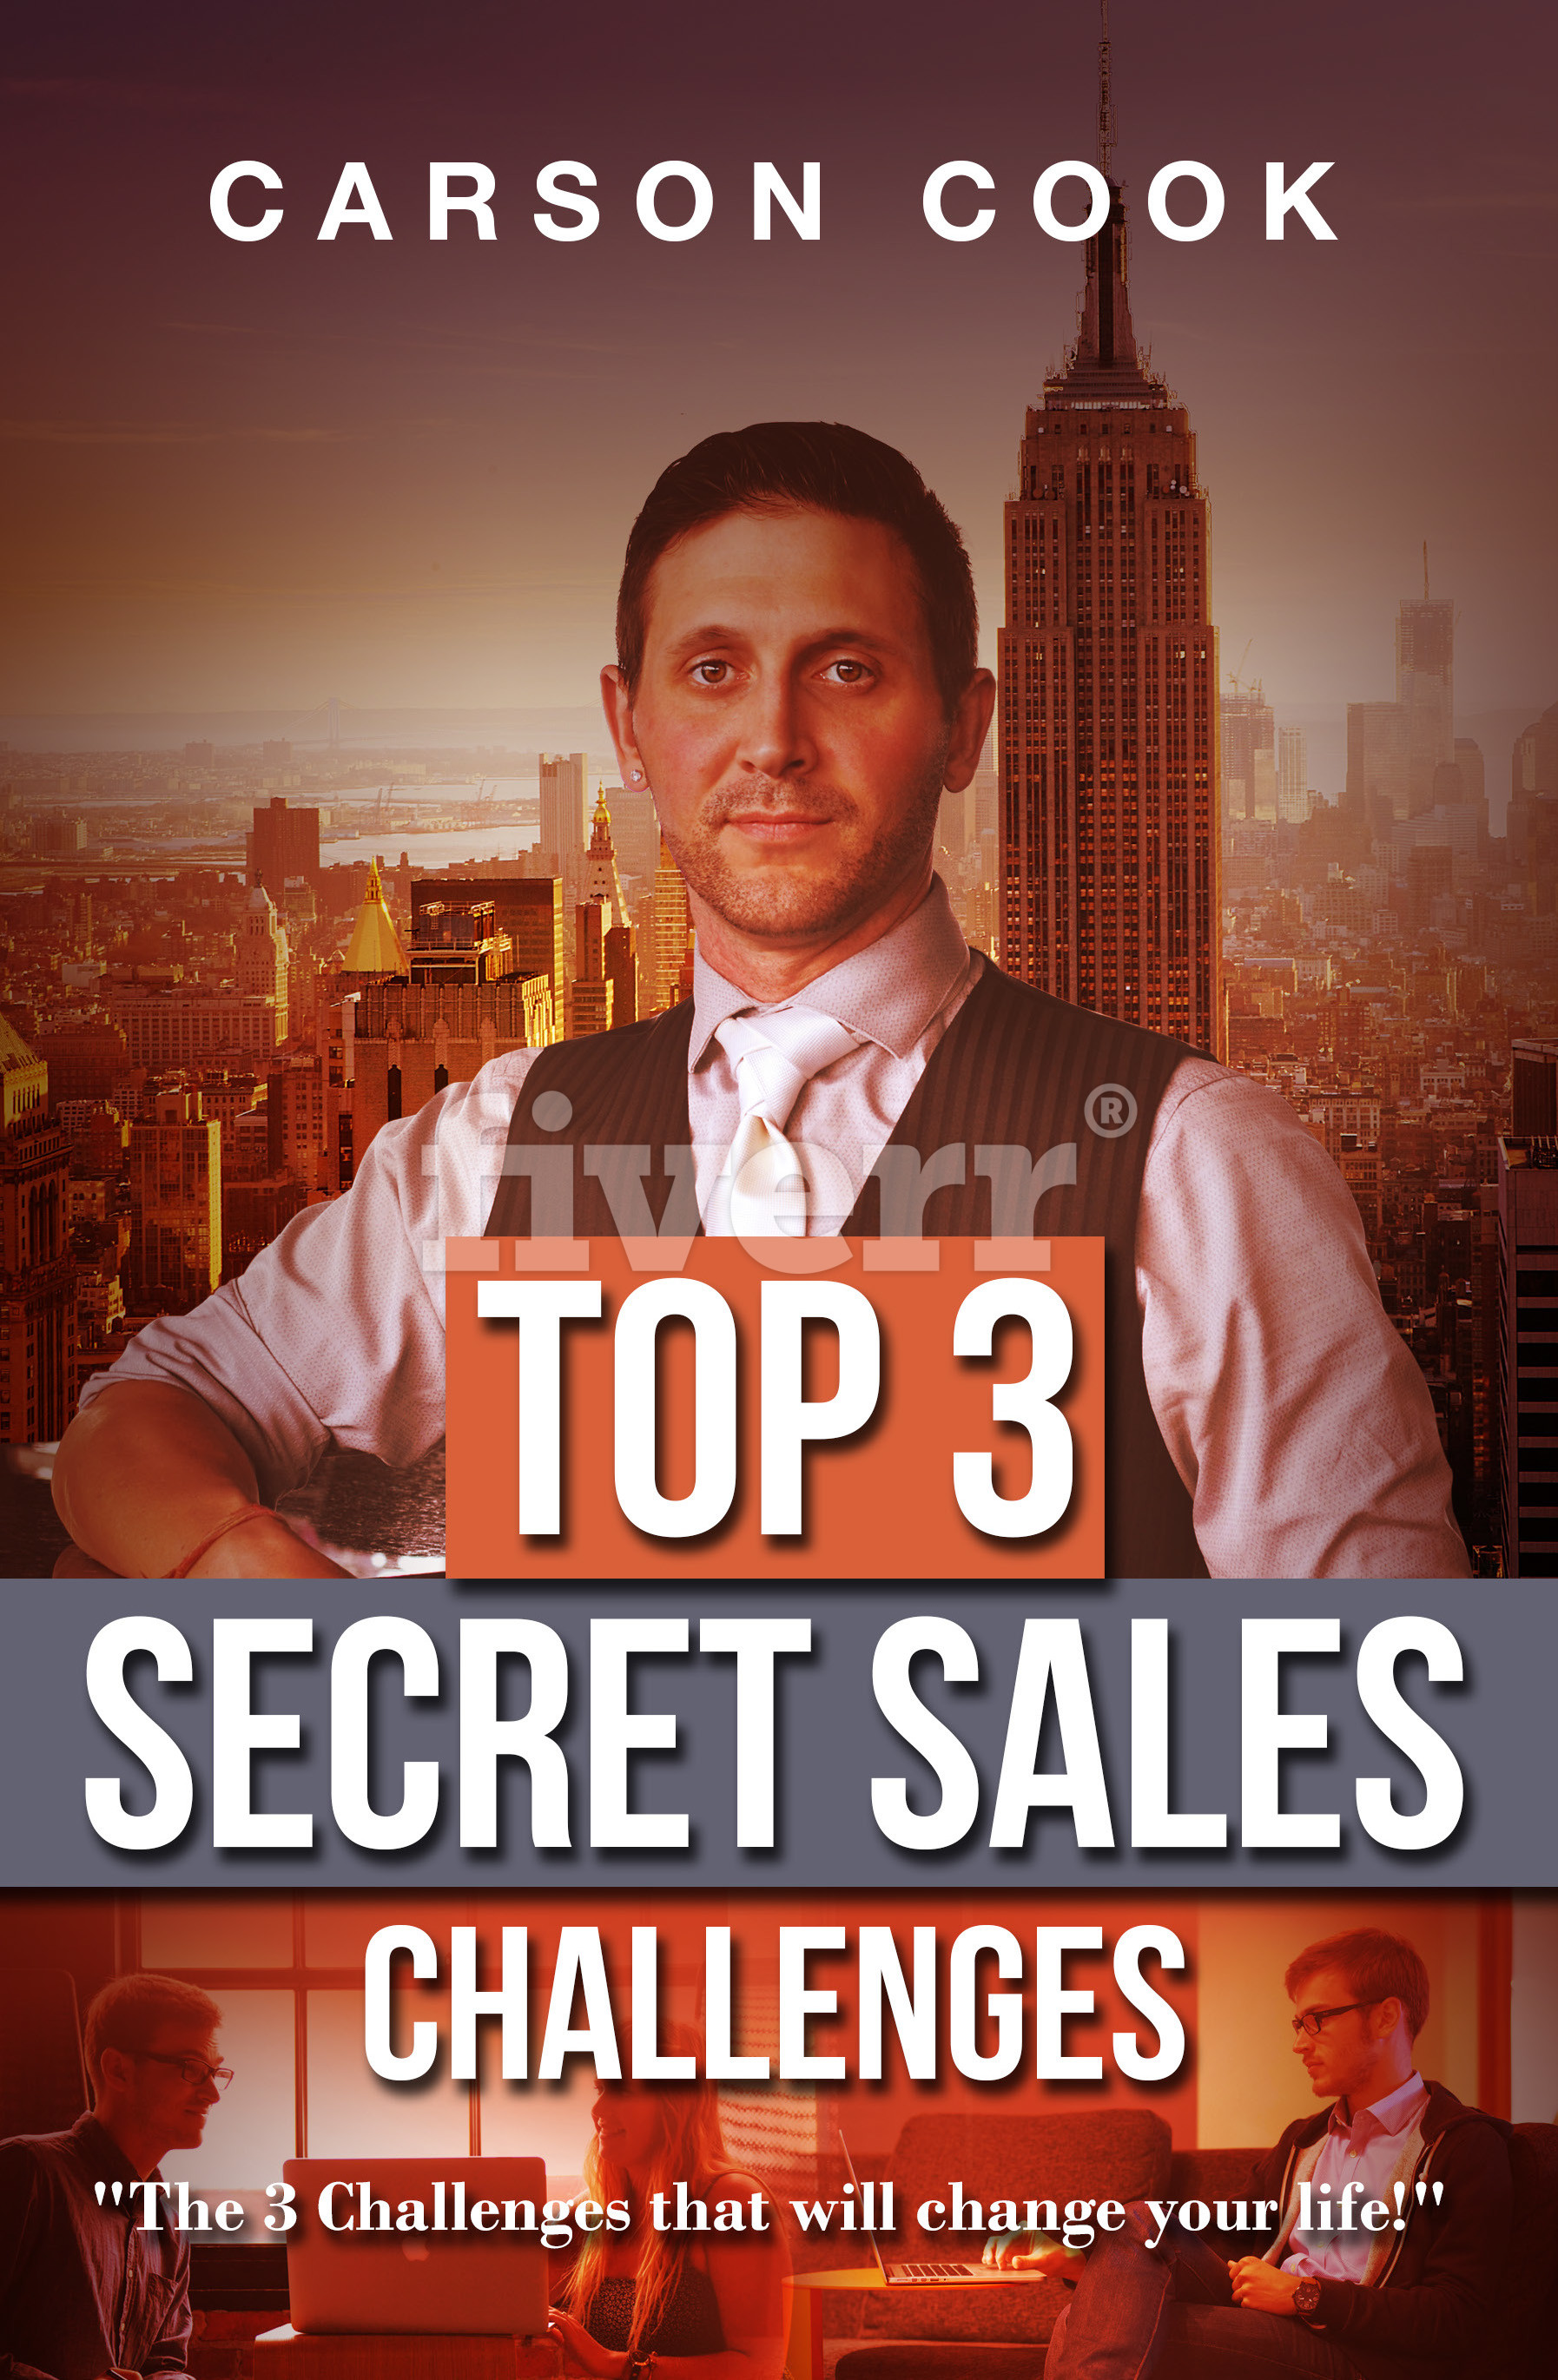 FREE: Top 3 Secret Sales Challenges by Carson Cook